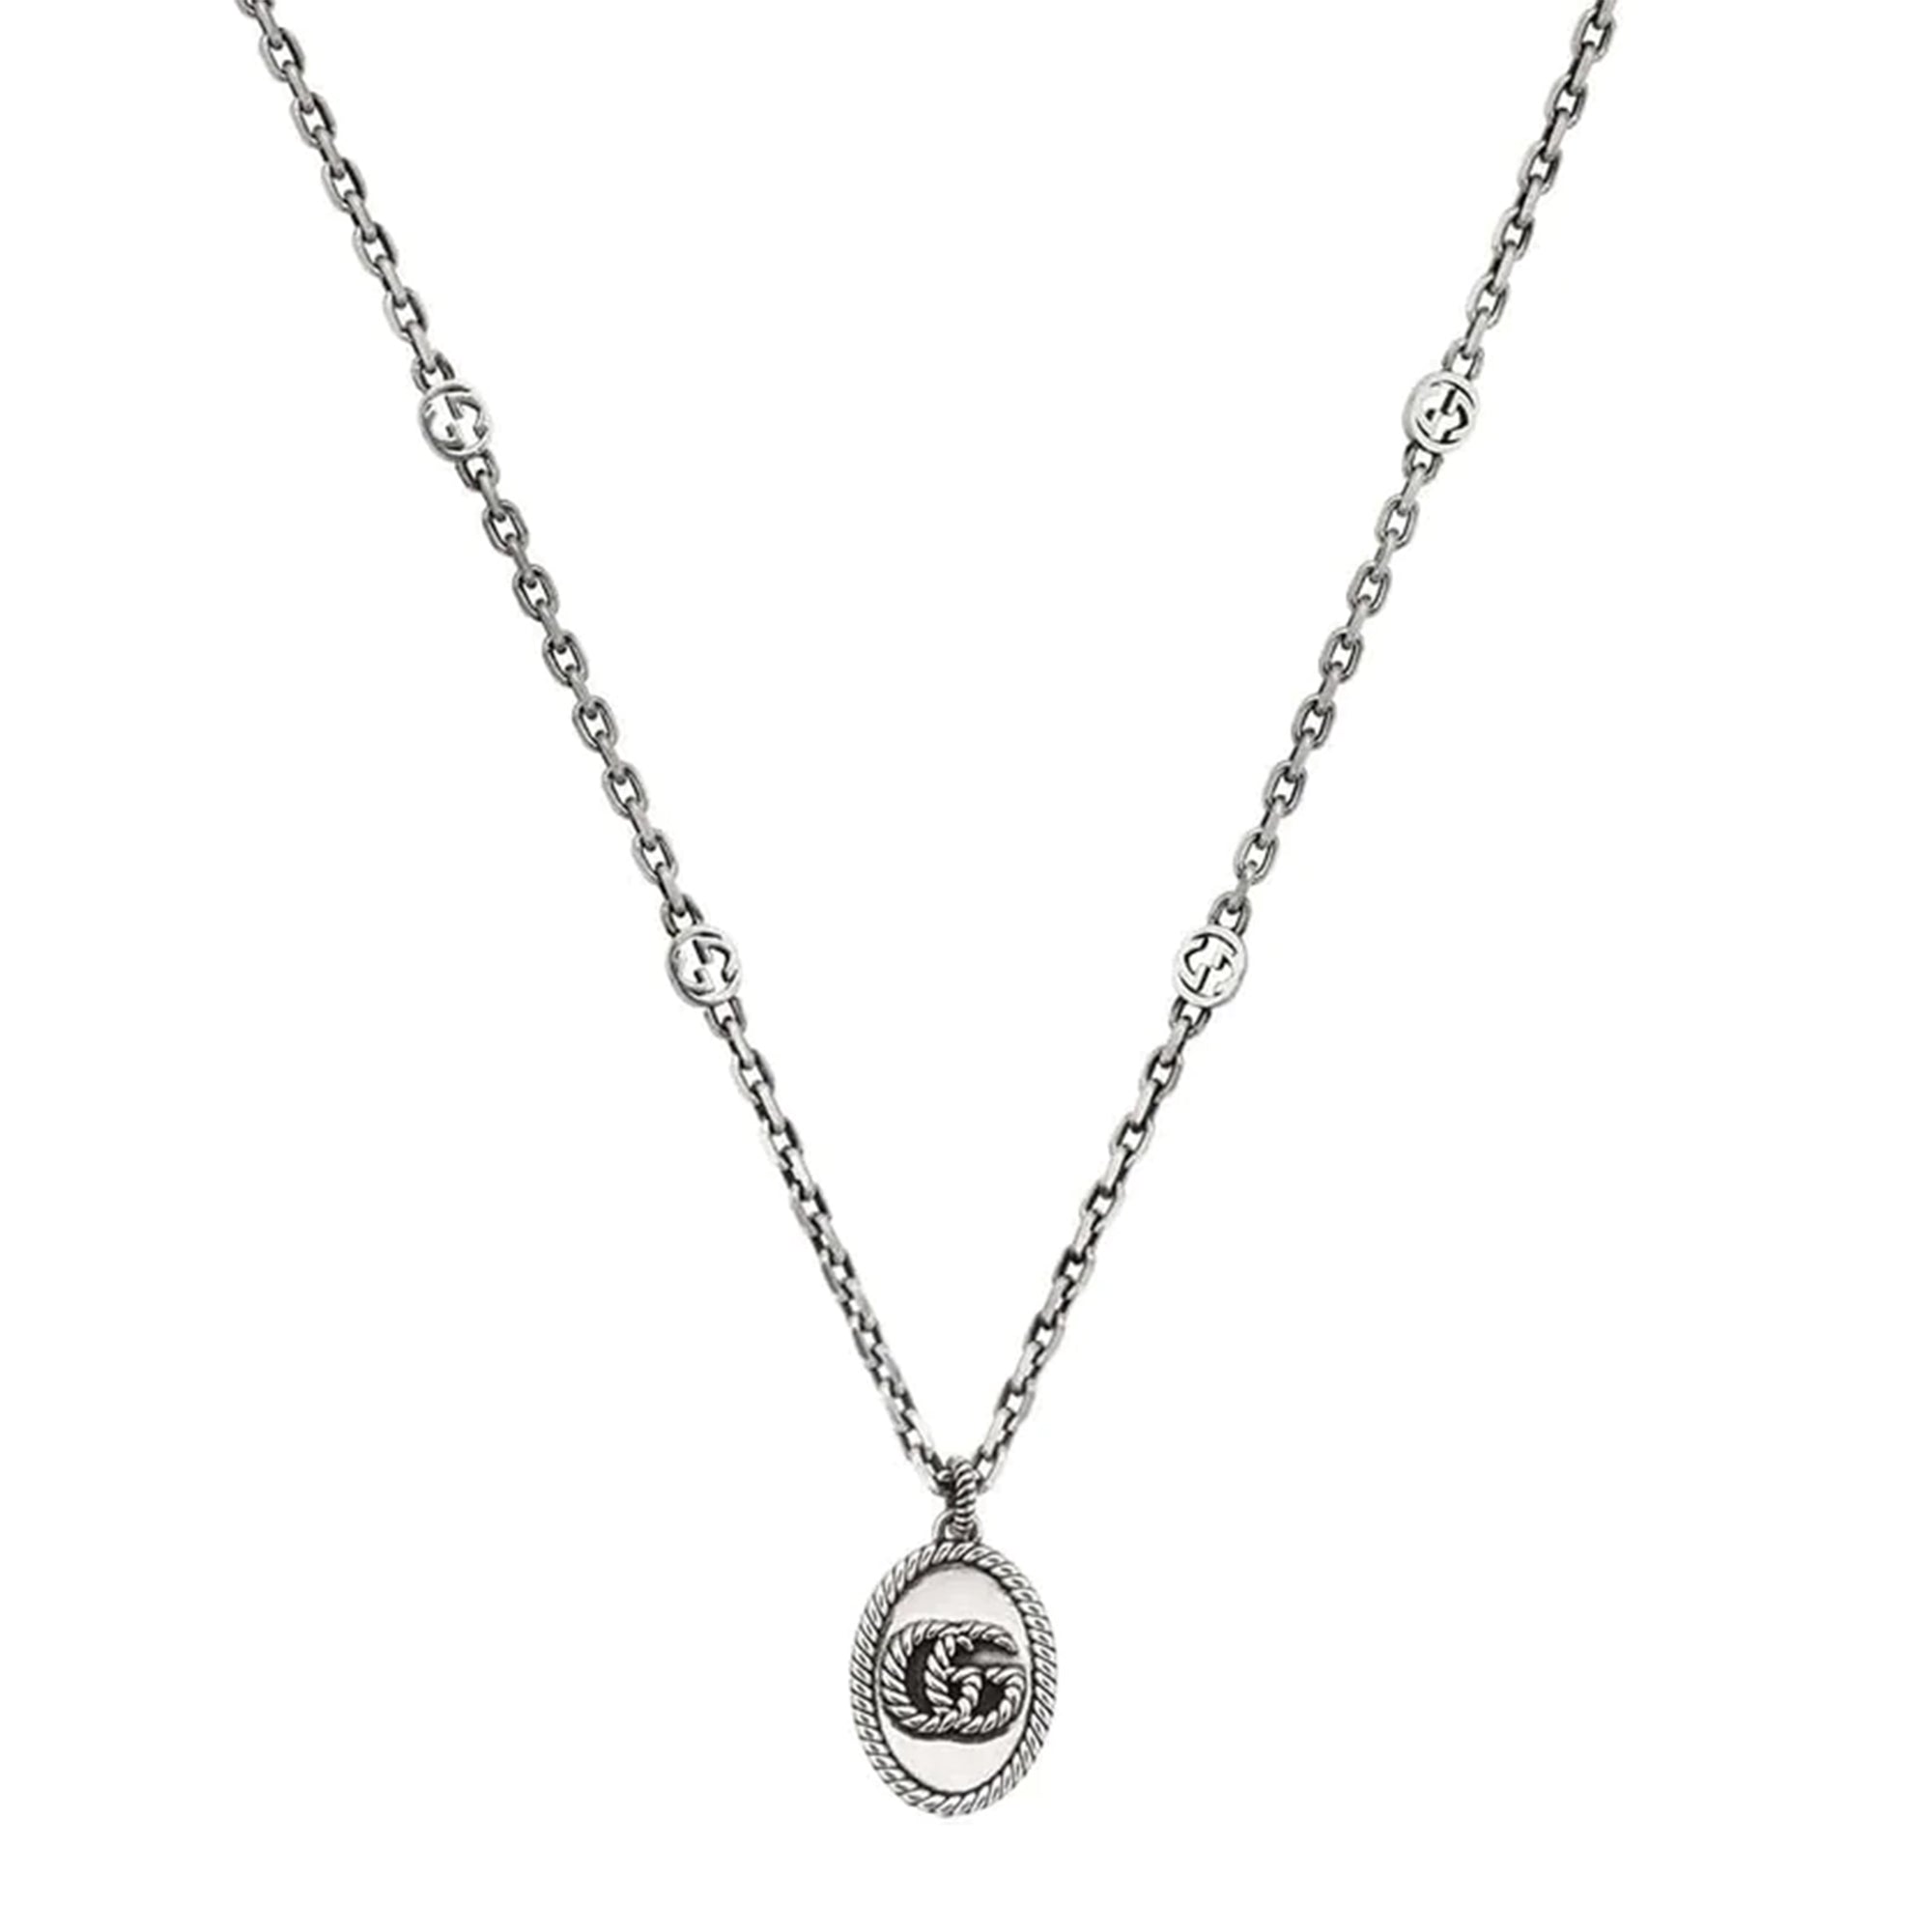 GG Medallion Necklace in Sterling